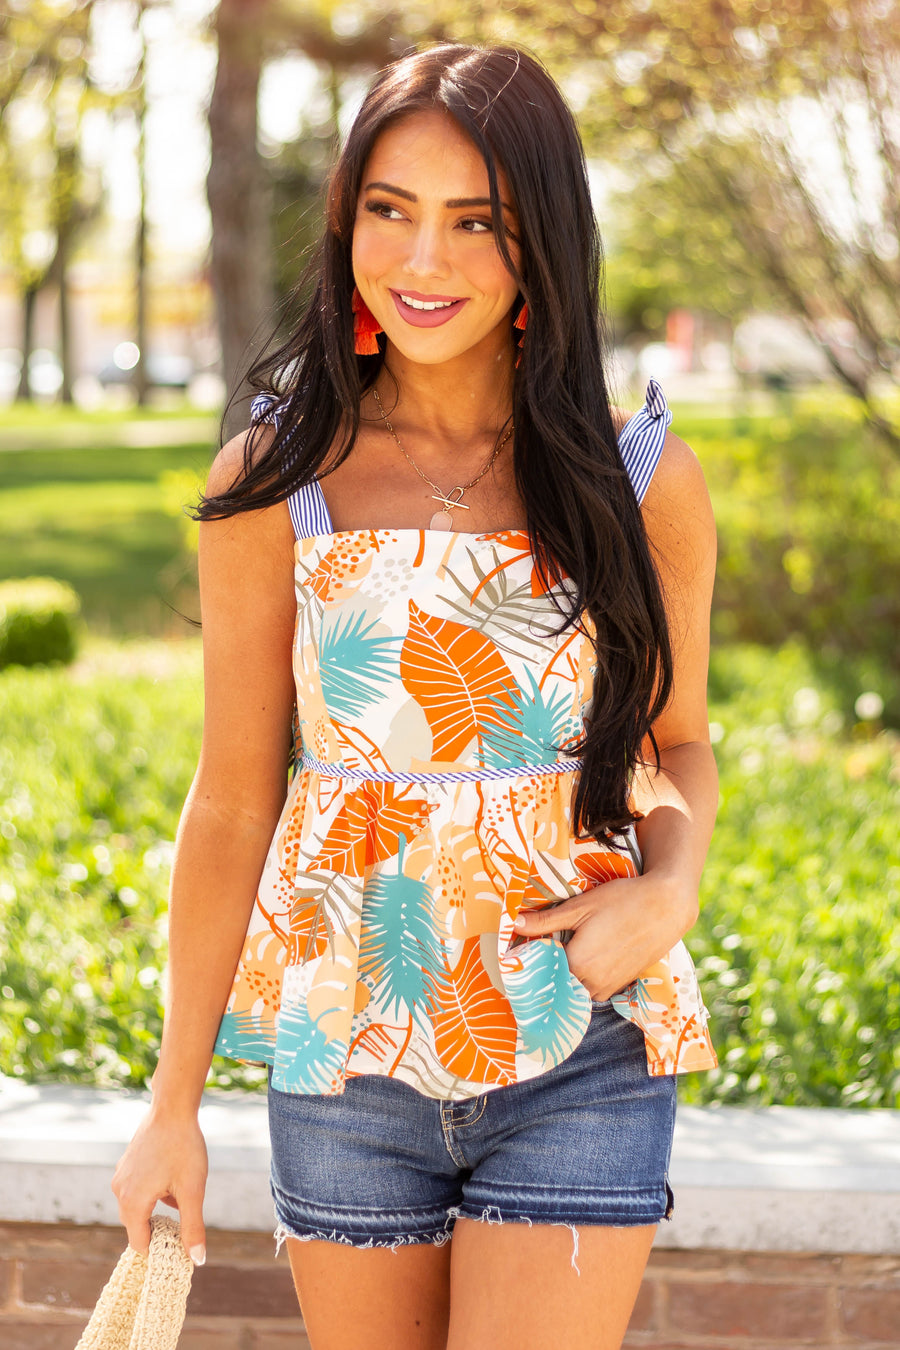 Sunset Multiprint Peplum Tank Top with Tie Straps